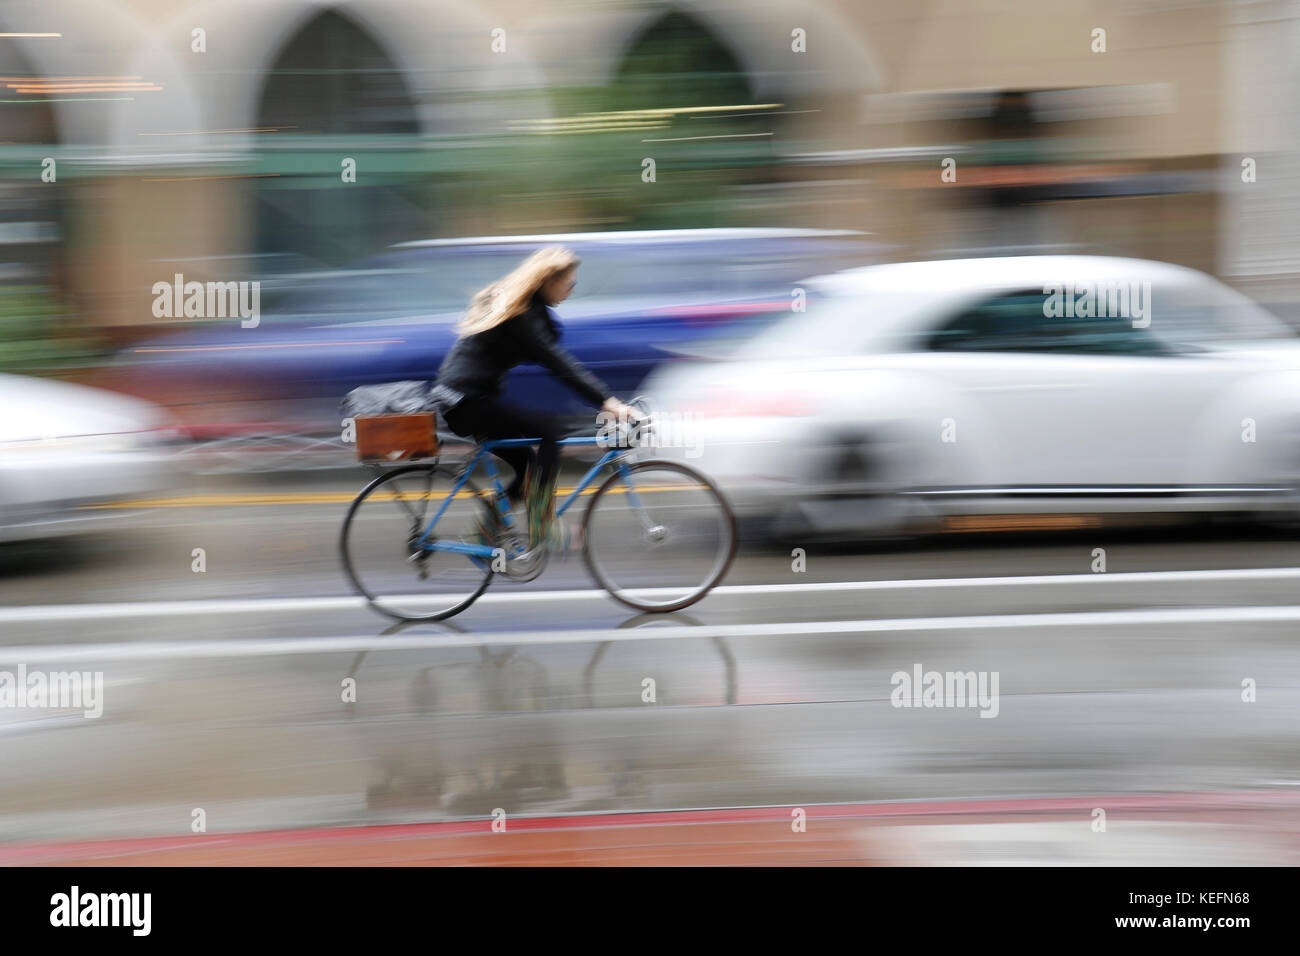 Cyclist in motion panning camera Stock Photo